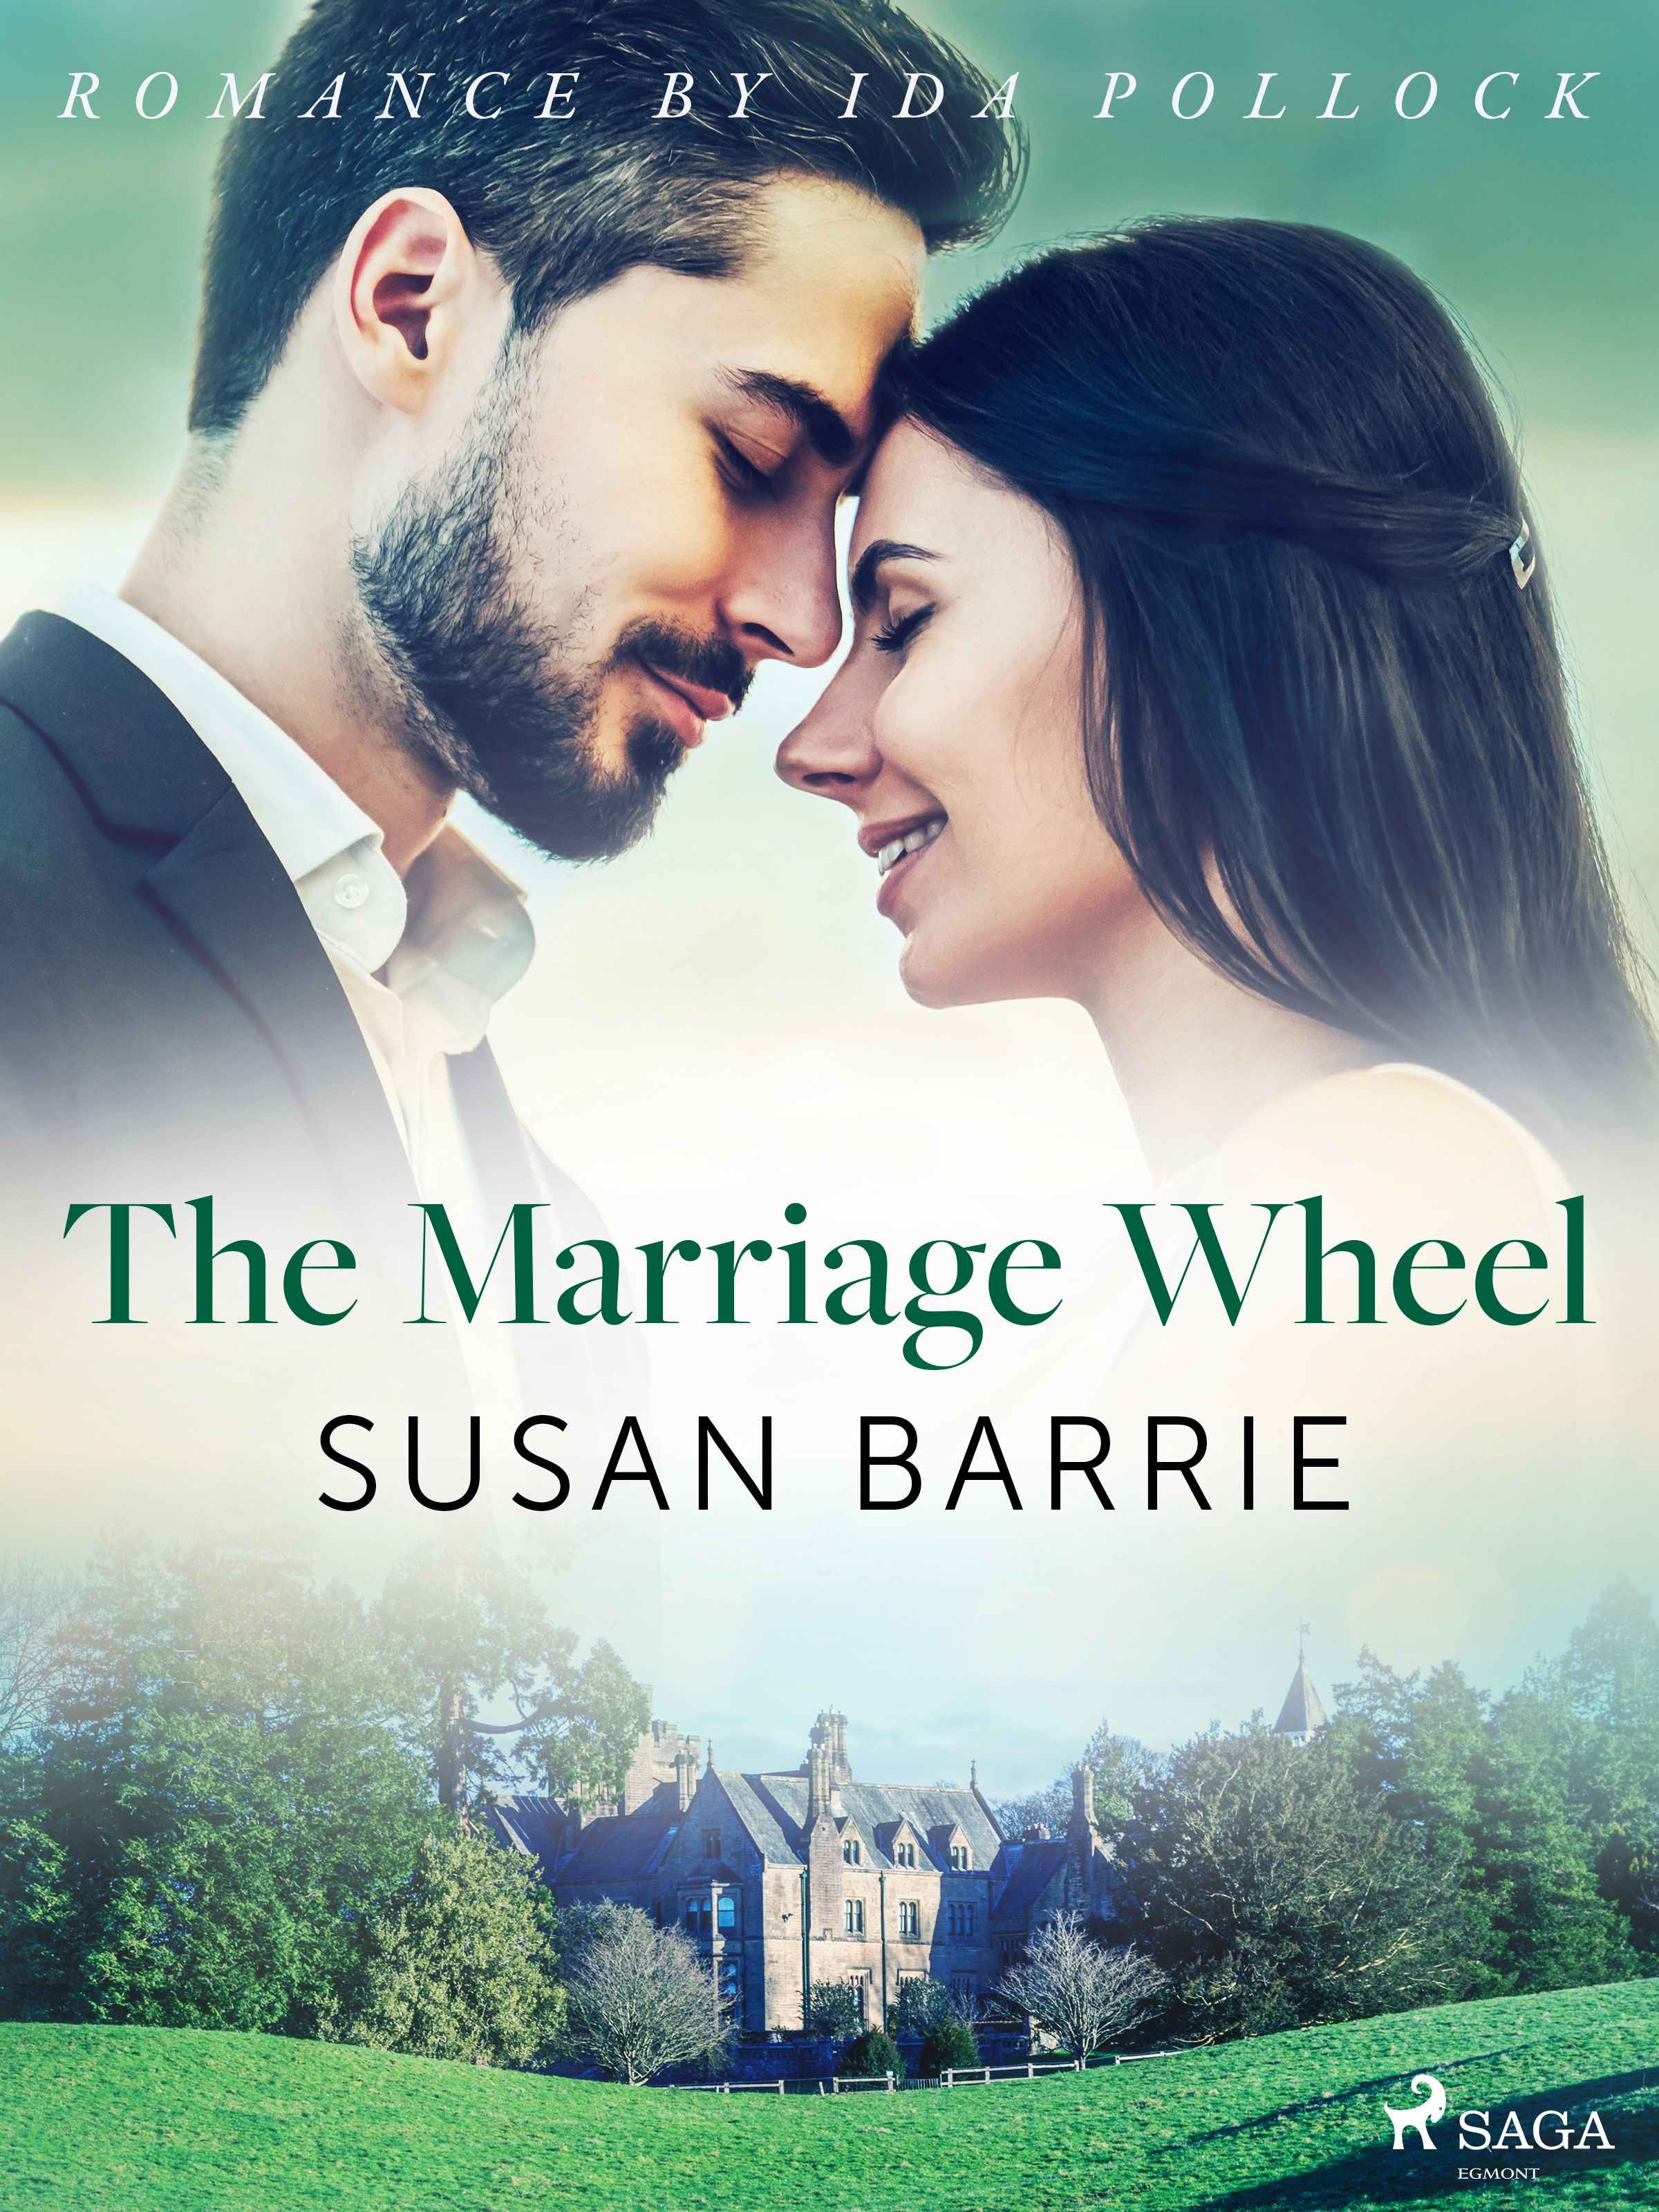 The Marriage Wheel, eBook by Susan Barrie